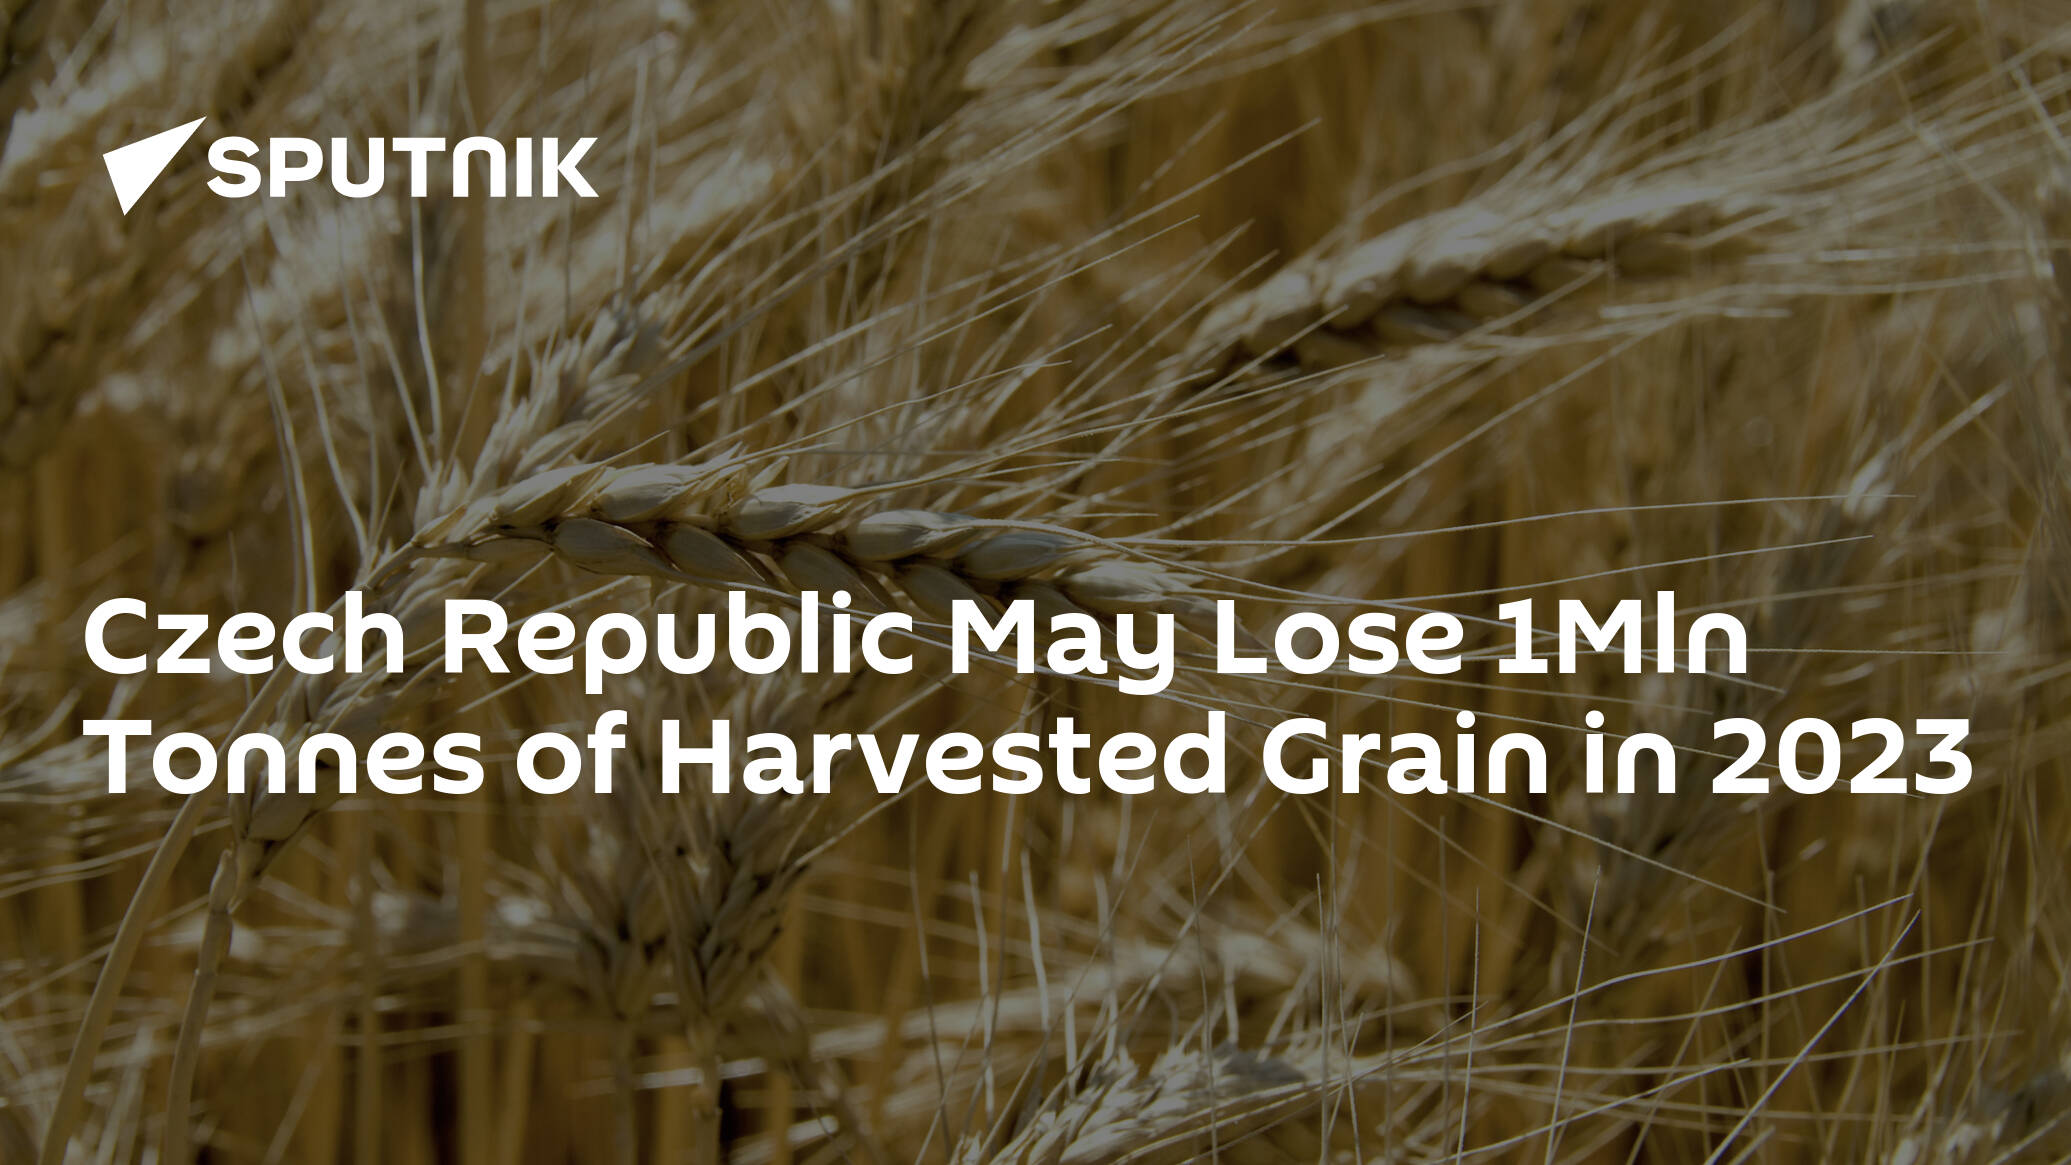 Czech Republic May Lose 1Mln Tonnes of Harvested Grain in 2023